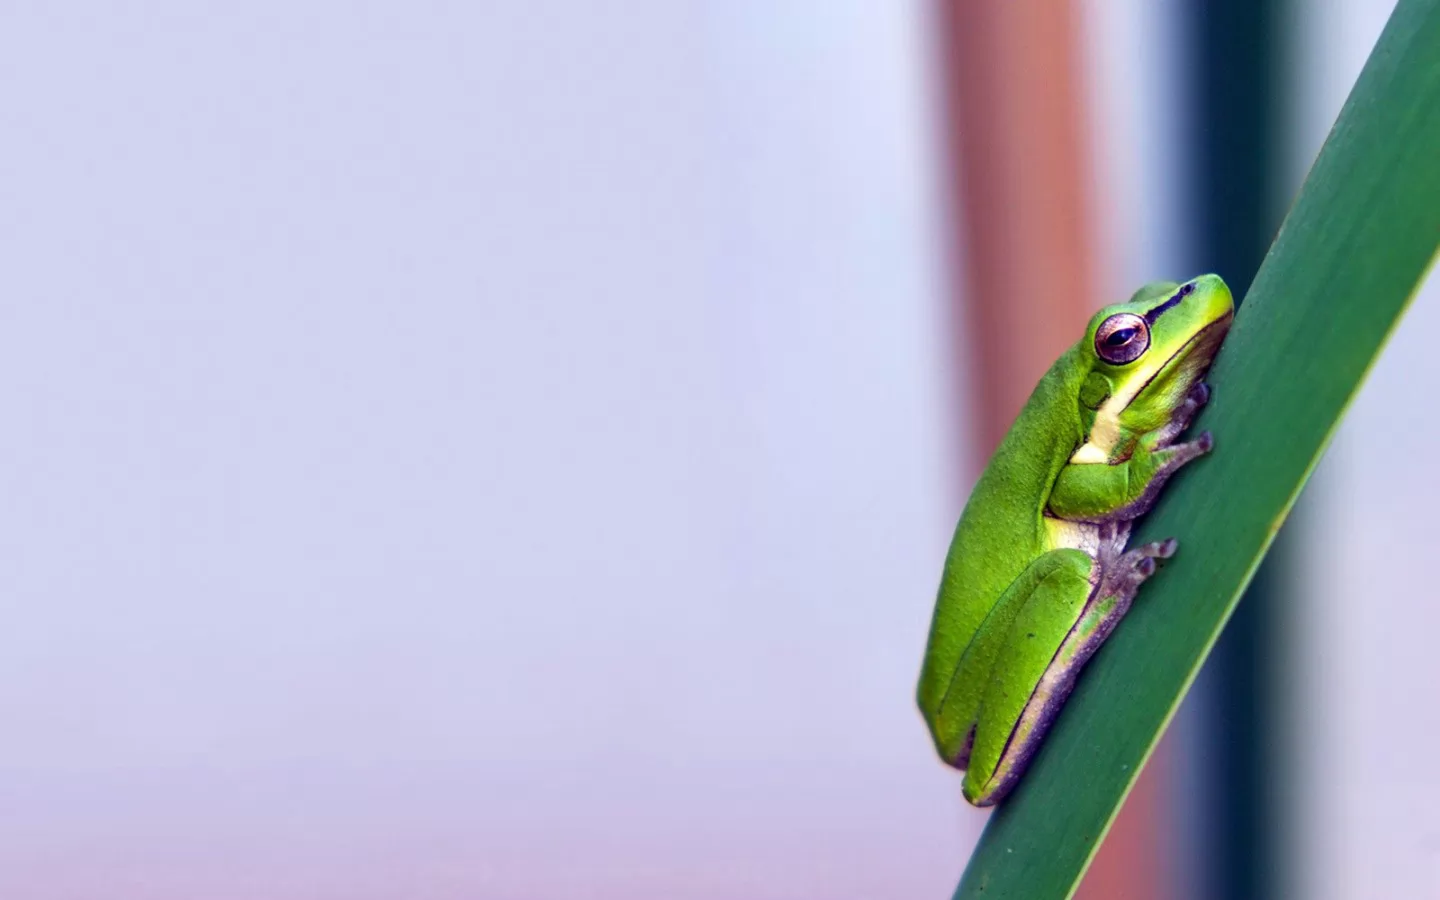 The Young frog on a blade, amphibious, animals, frogs, green x